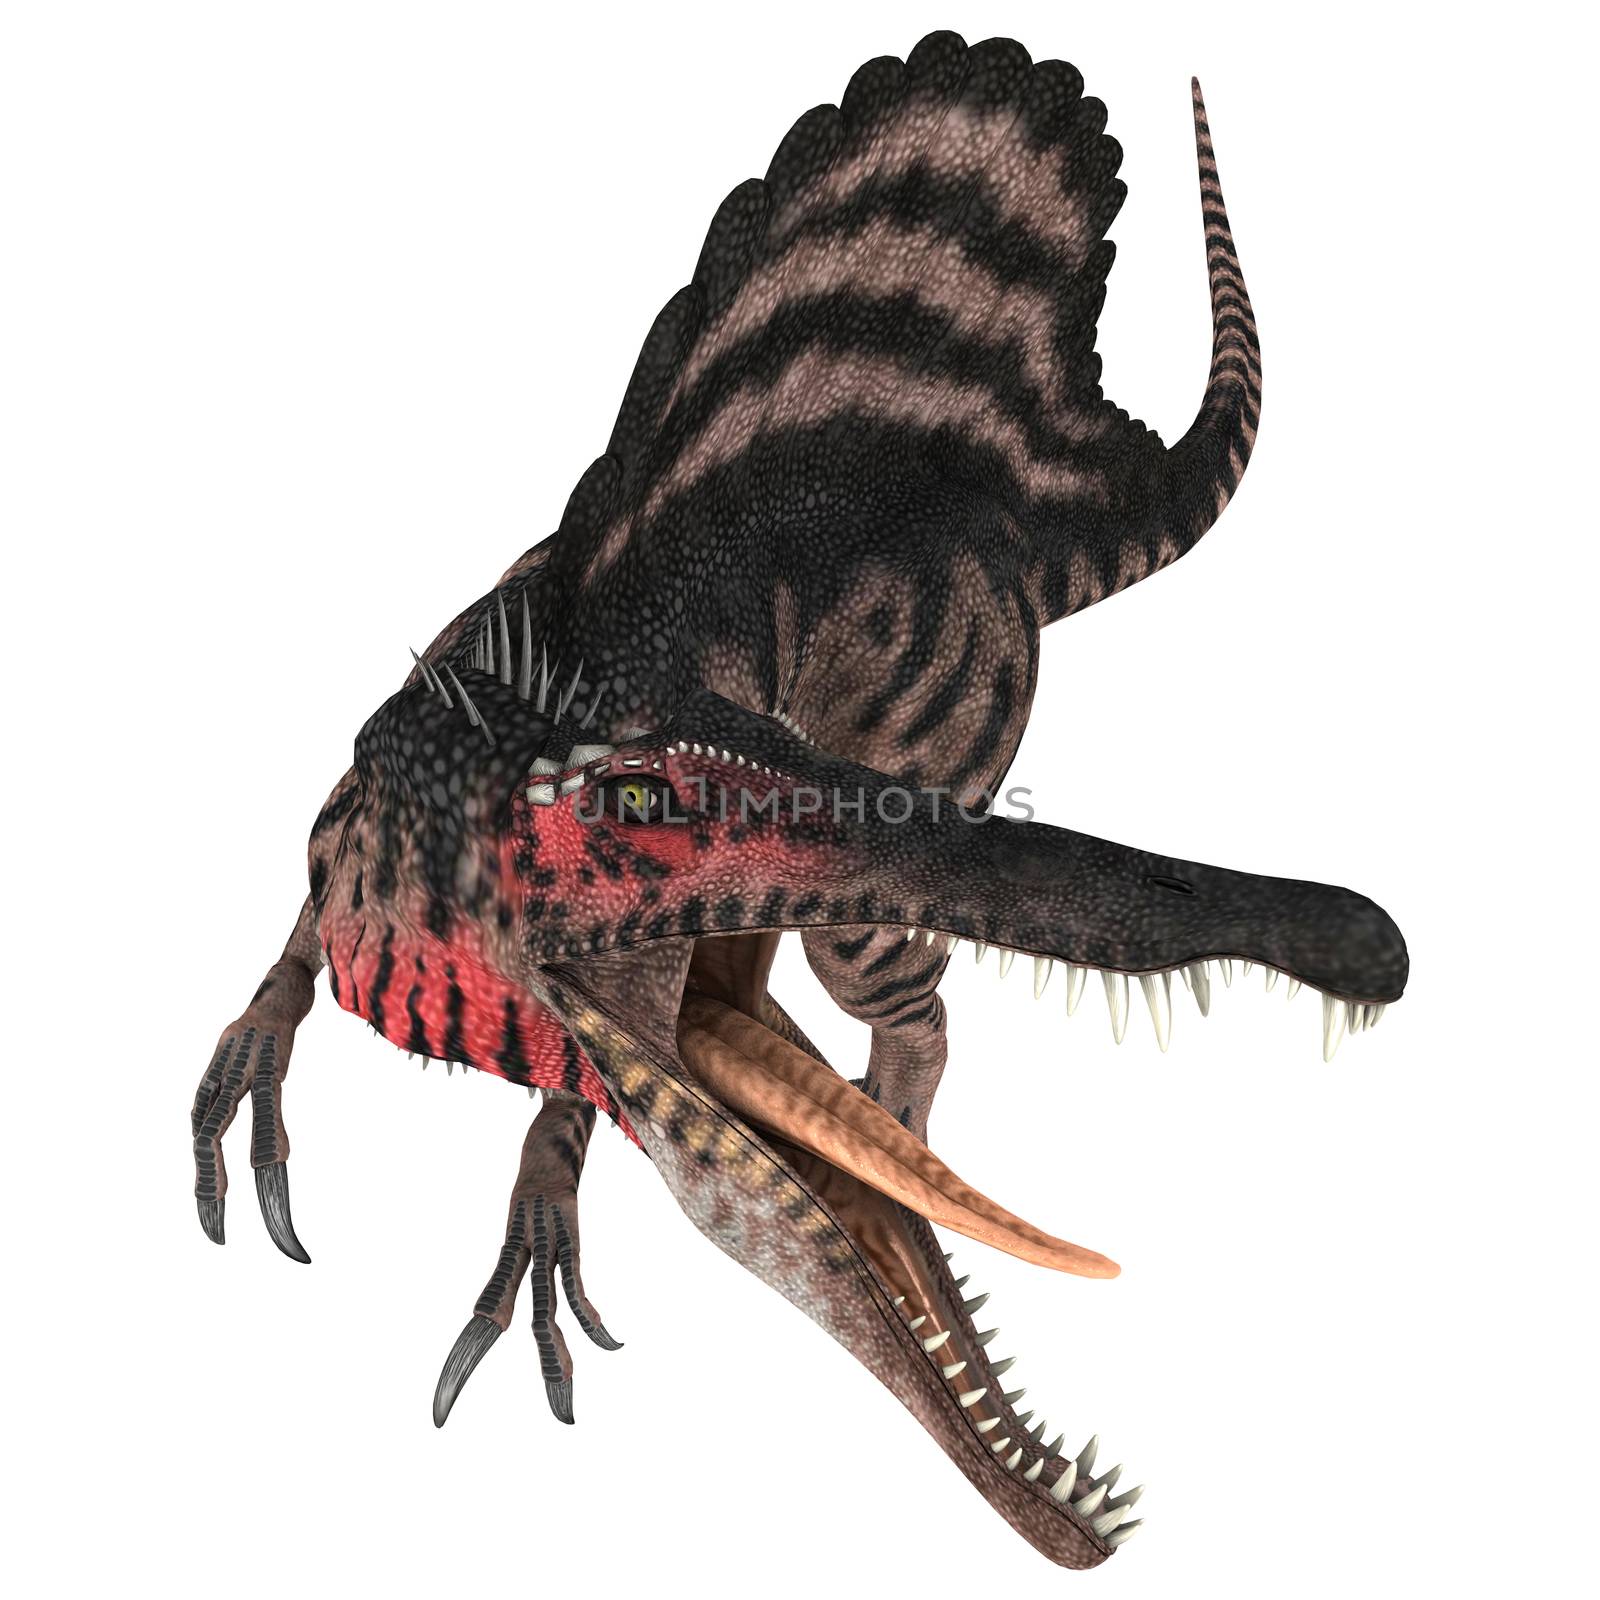 3D digital render of an aggressive Cretaceous dinosaur Spinosaurus or spiny lizard isolated on white background